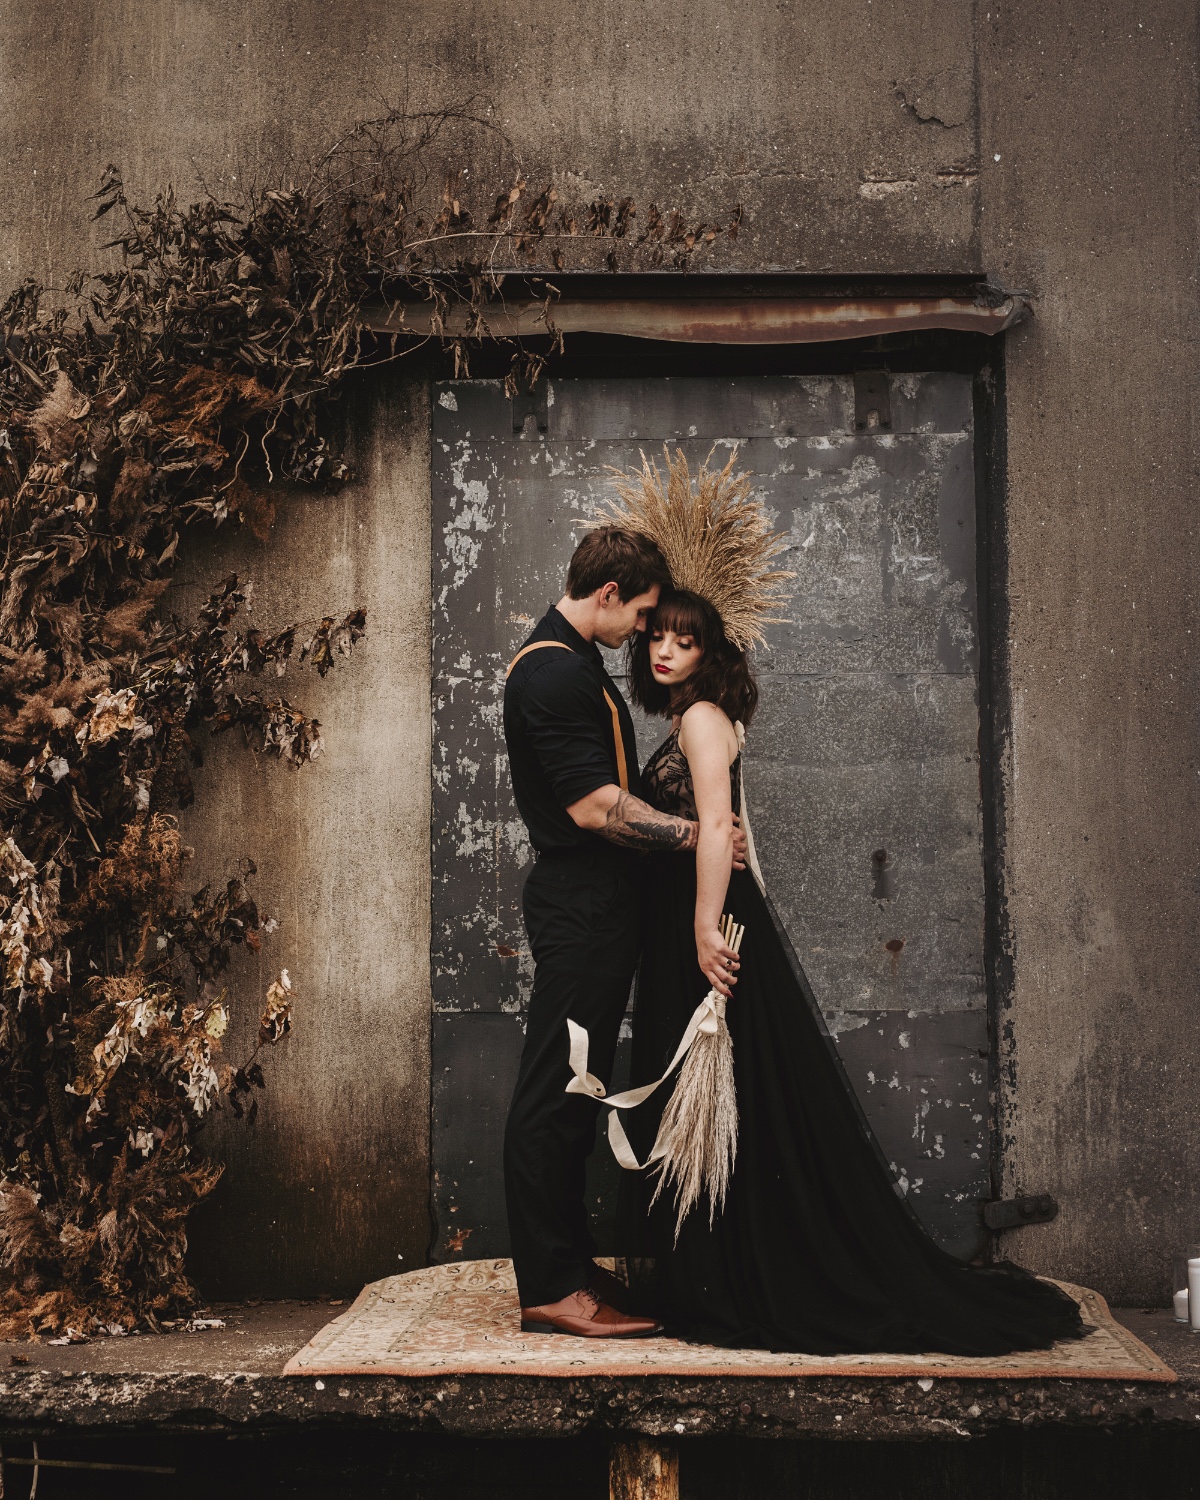 This Styled Wedding Shoot At a Granary in Illinois Had No Color, But It Was Pretty Brilliant Nonetheless